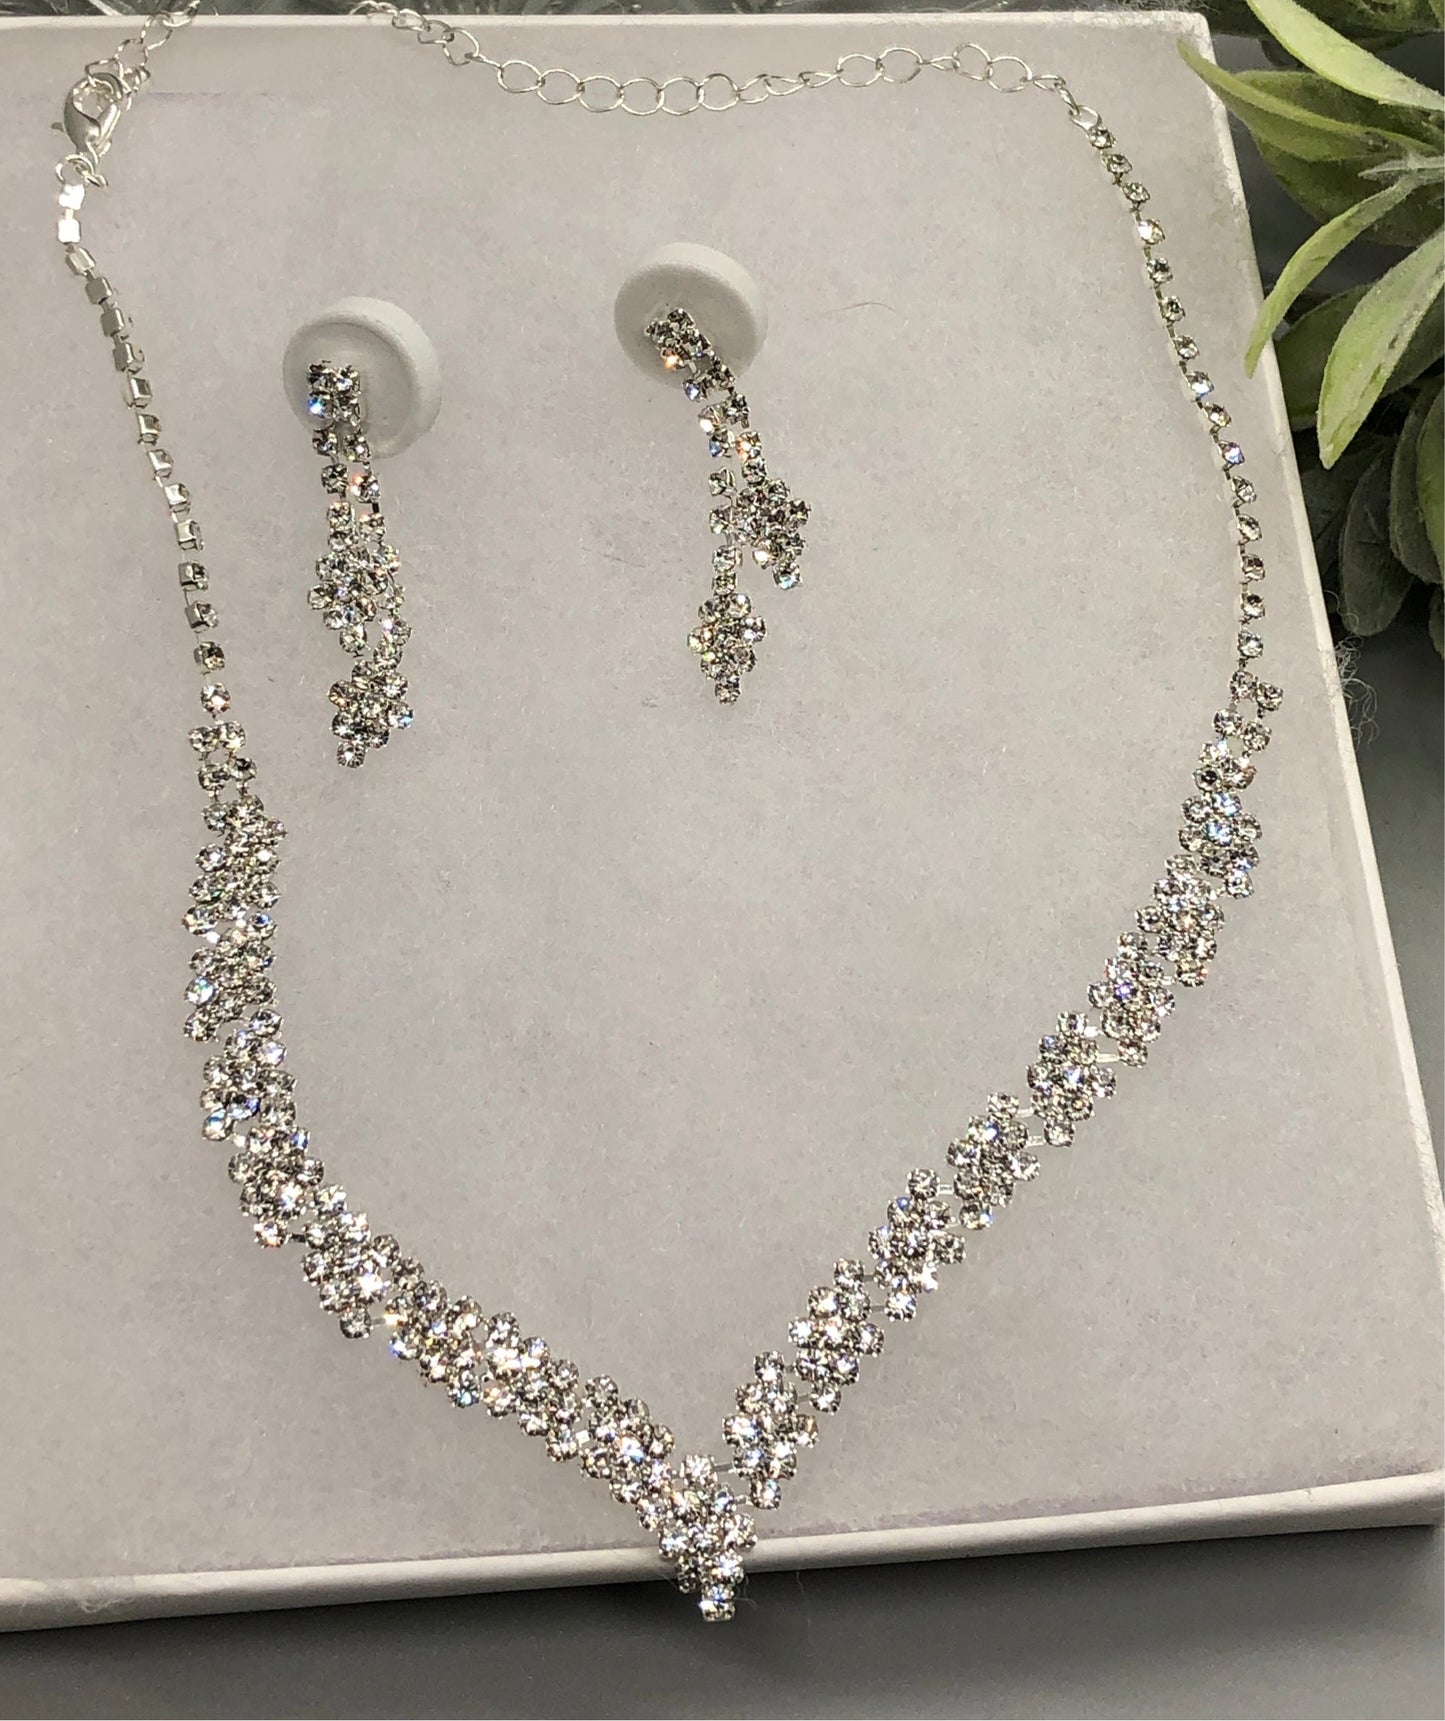 Crystal Rhinestone Bridal Necklace Earrings Sets Wedding Formal Shower Party Event Accessories #005